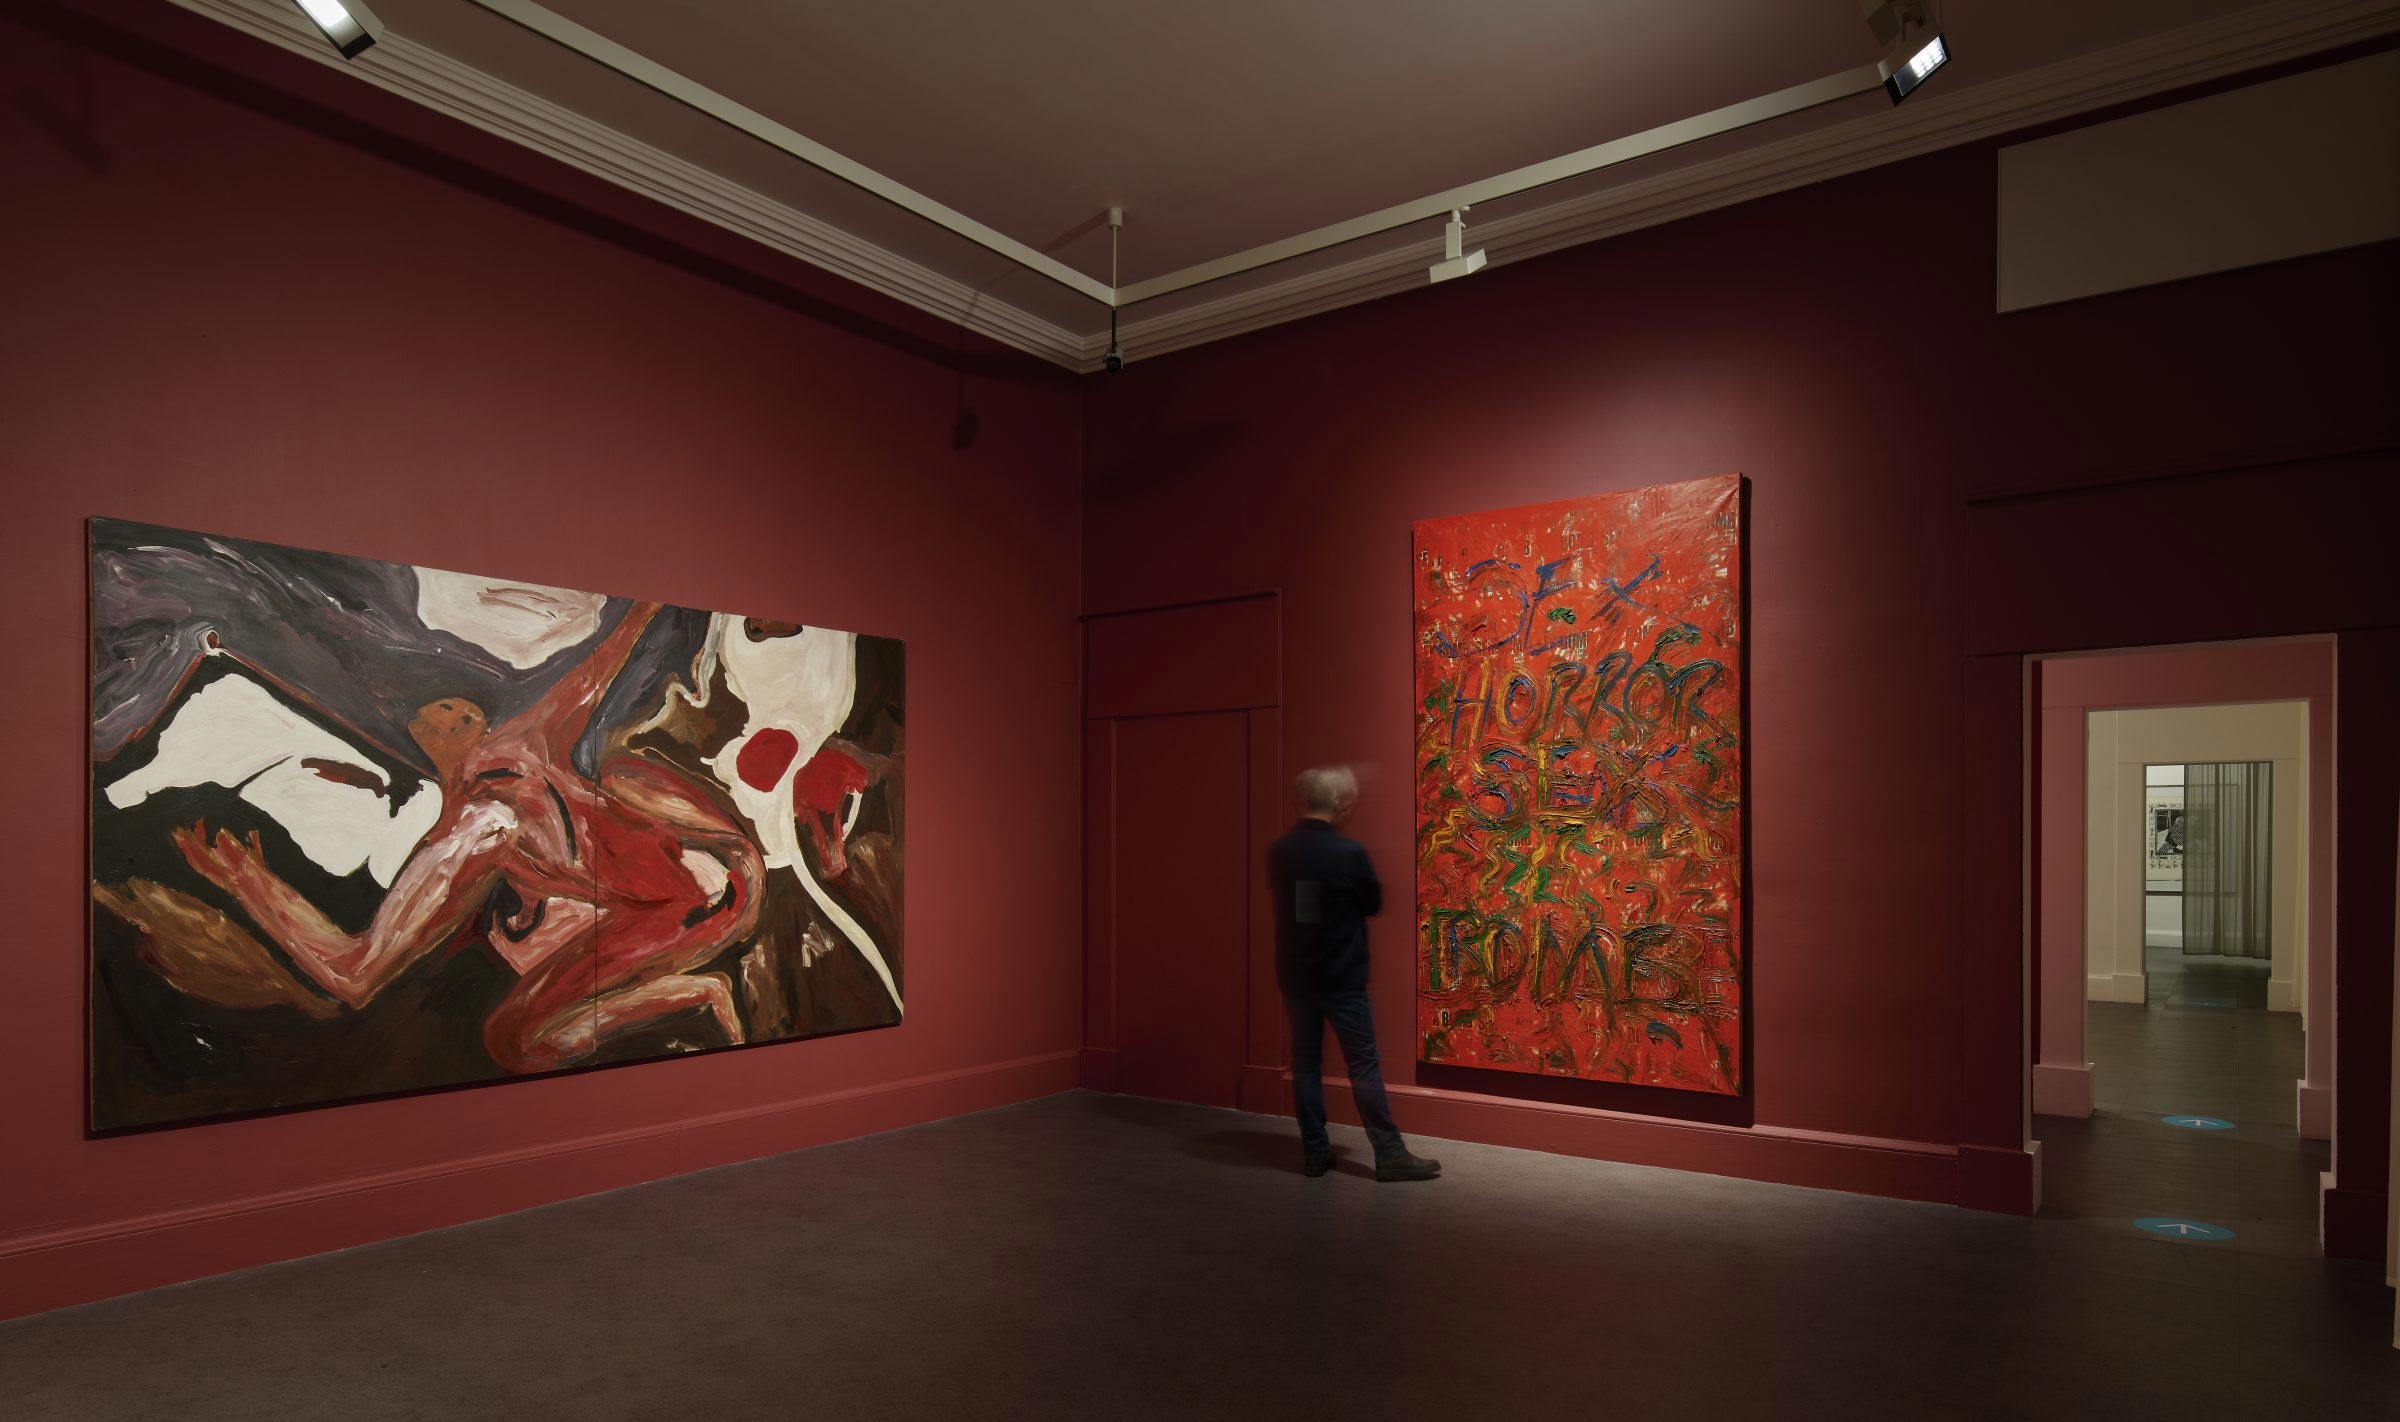 Interior photograph inside a gallery room with two large paintings. A blurred figure is looking at the works.